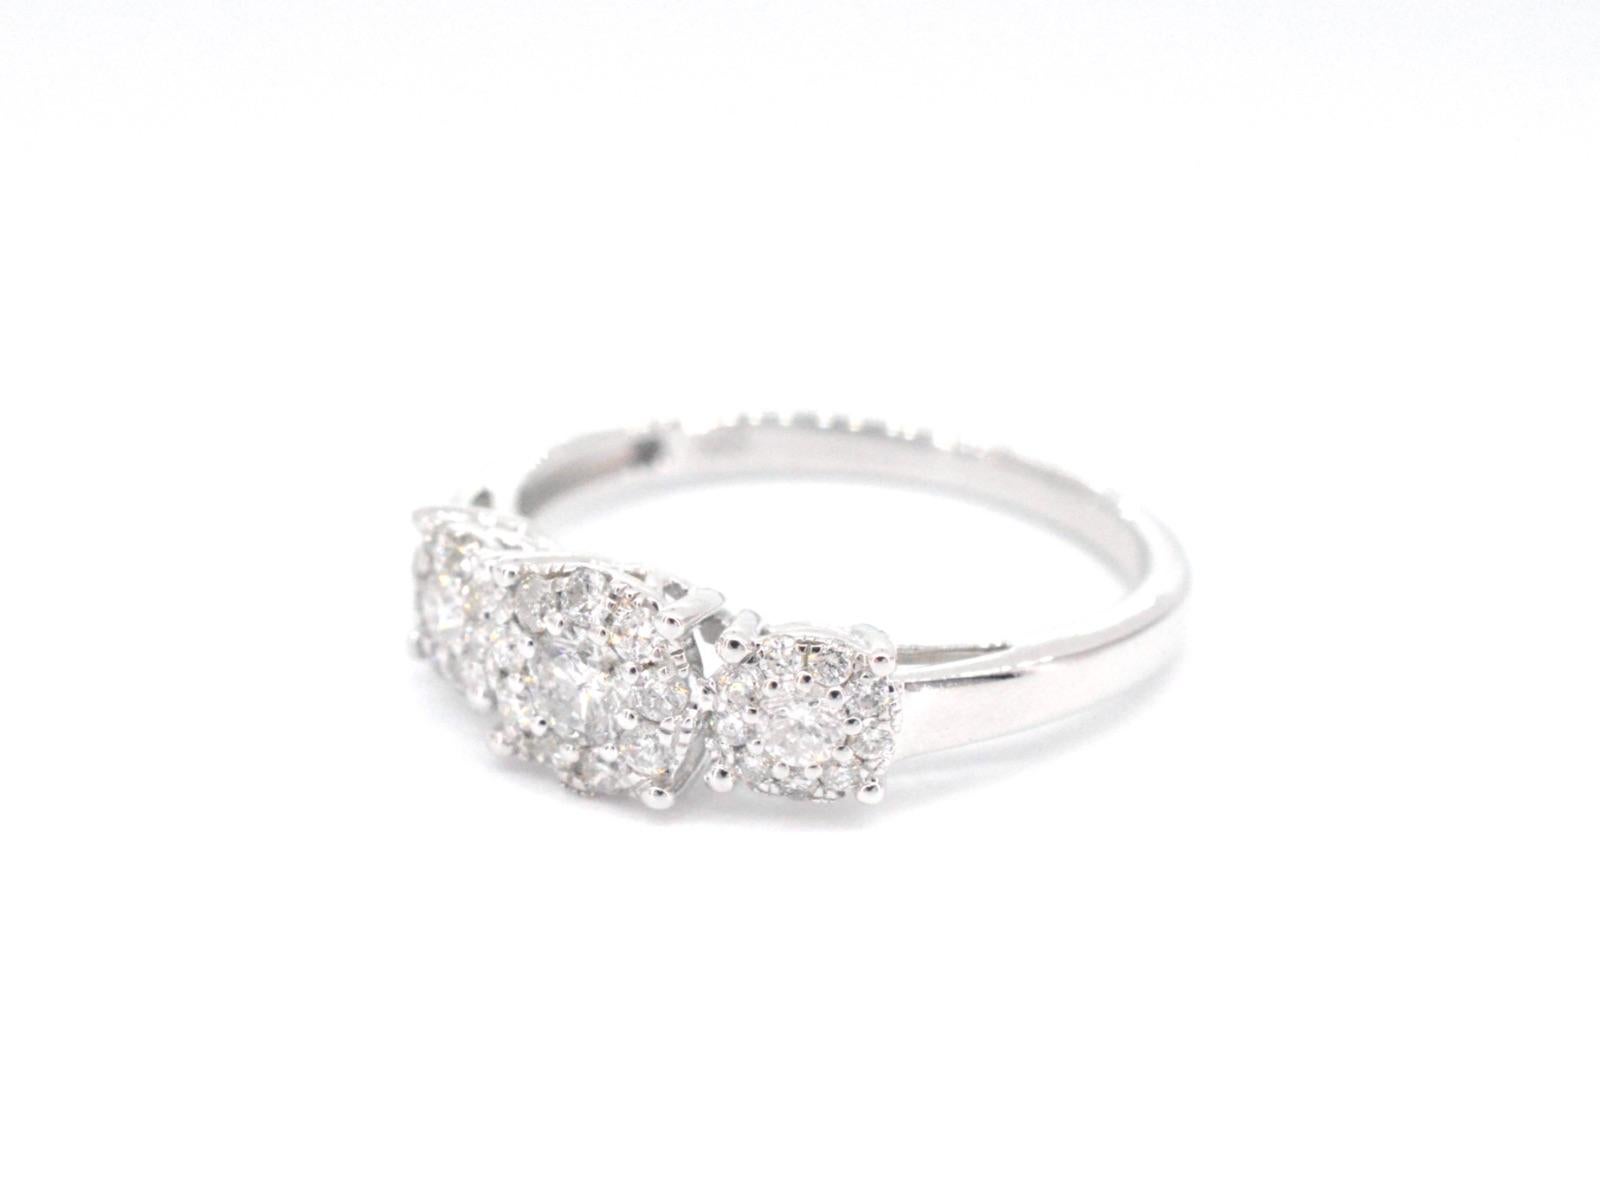 A white gold trinity ring with diamonds is a beautiful piece of jewelry that symbolizes eternal love and commitment. The trinity design features three interlocking bands of lustrous white gold, each set with sparkling diamonds.

The diamonds add an